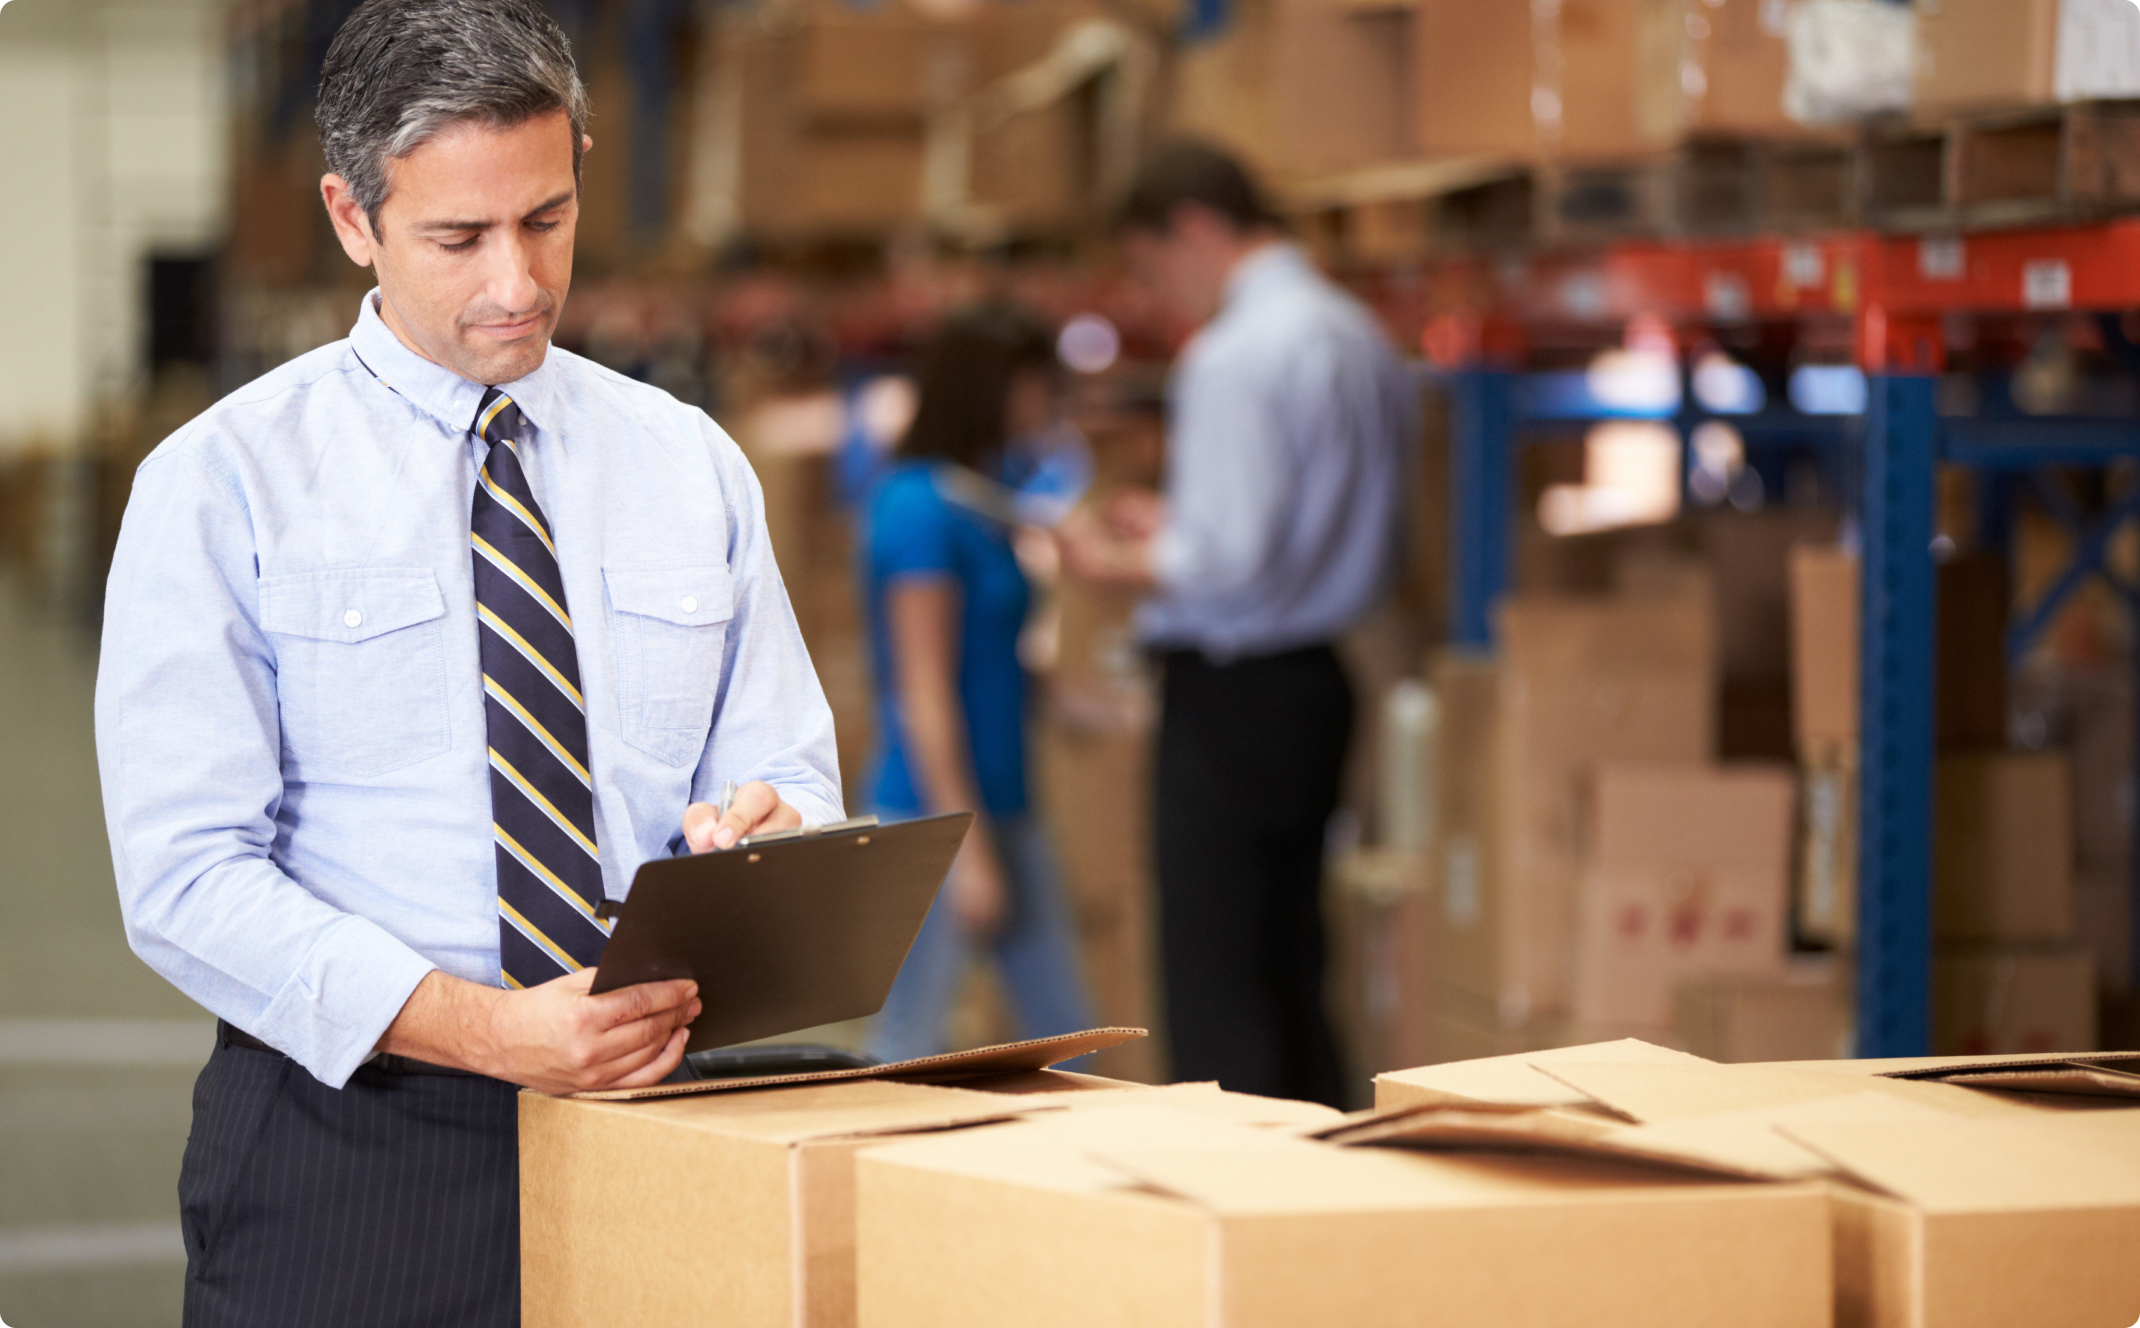 Male writing on clipboard in warehouse full of boxes